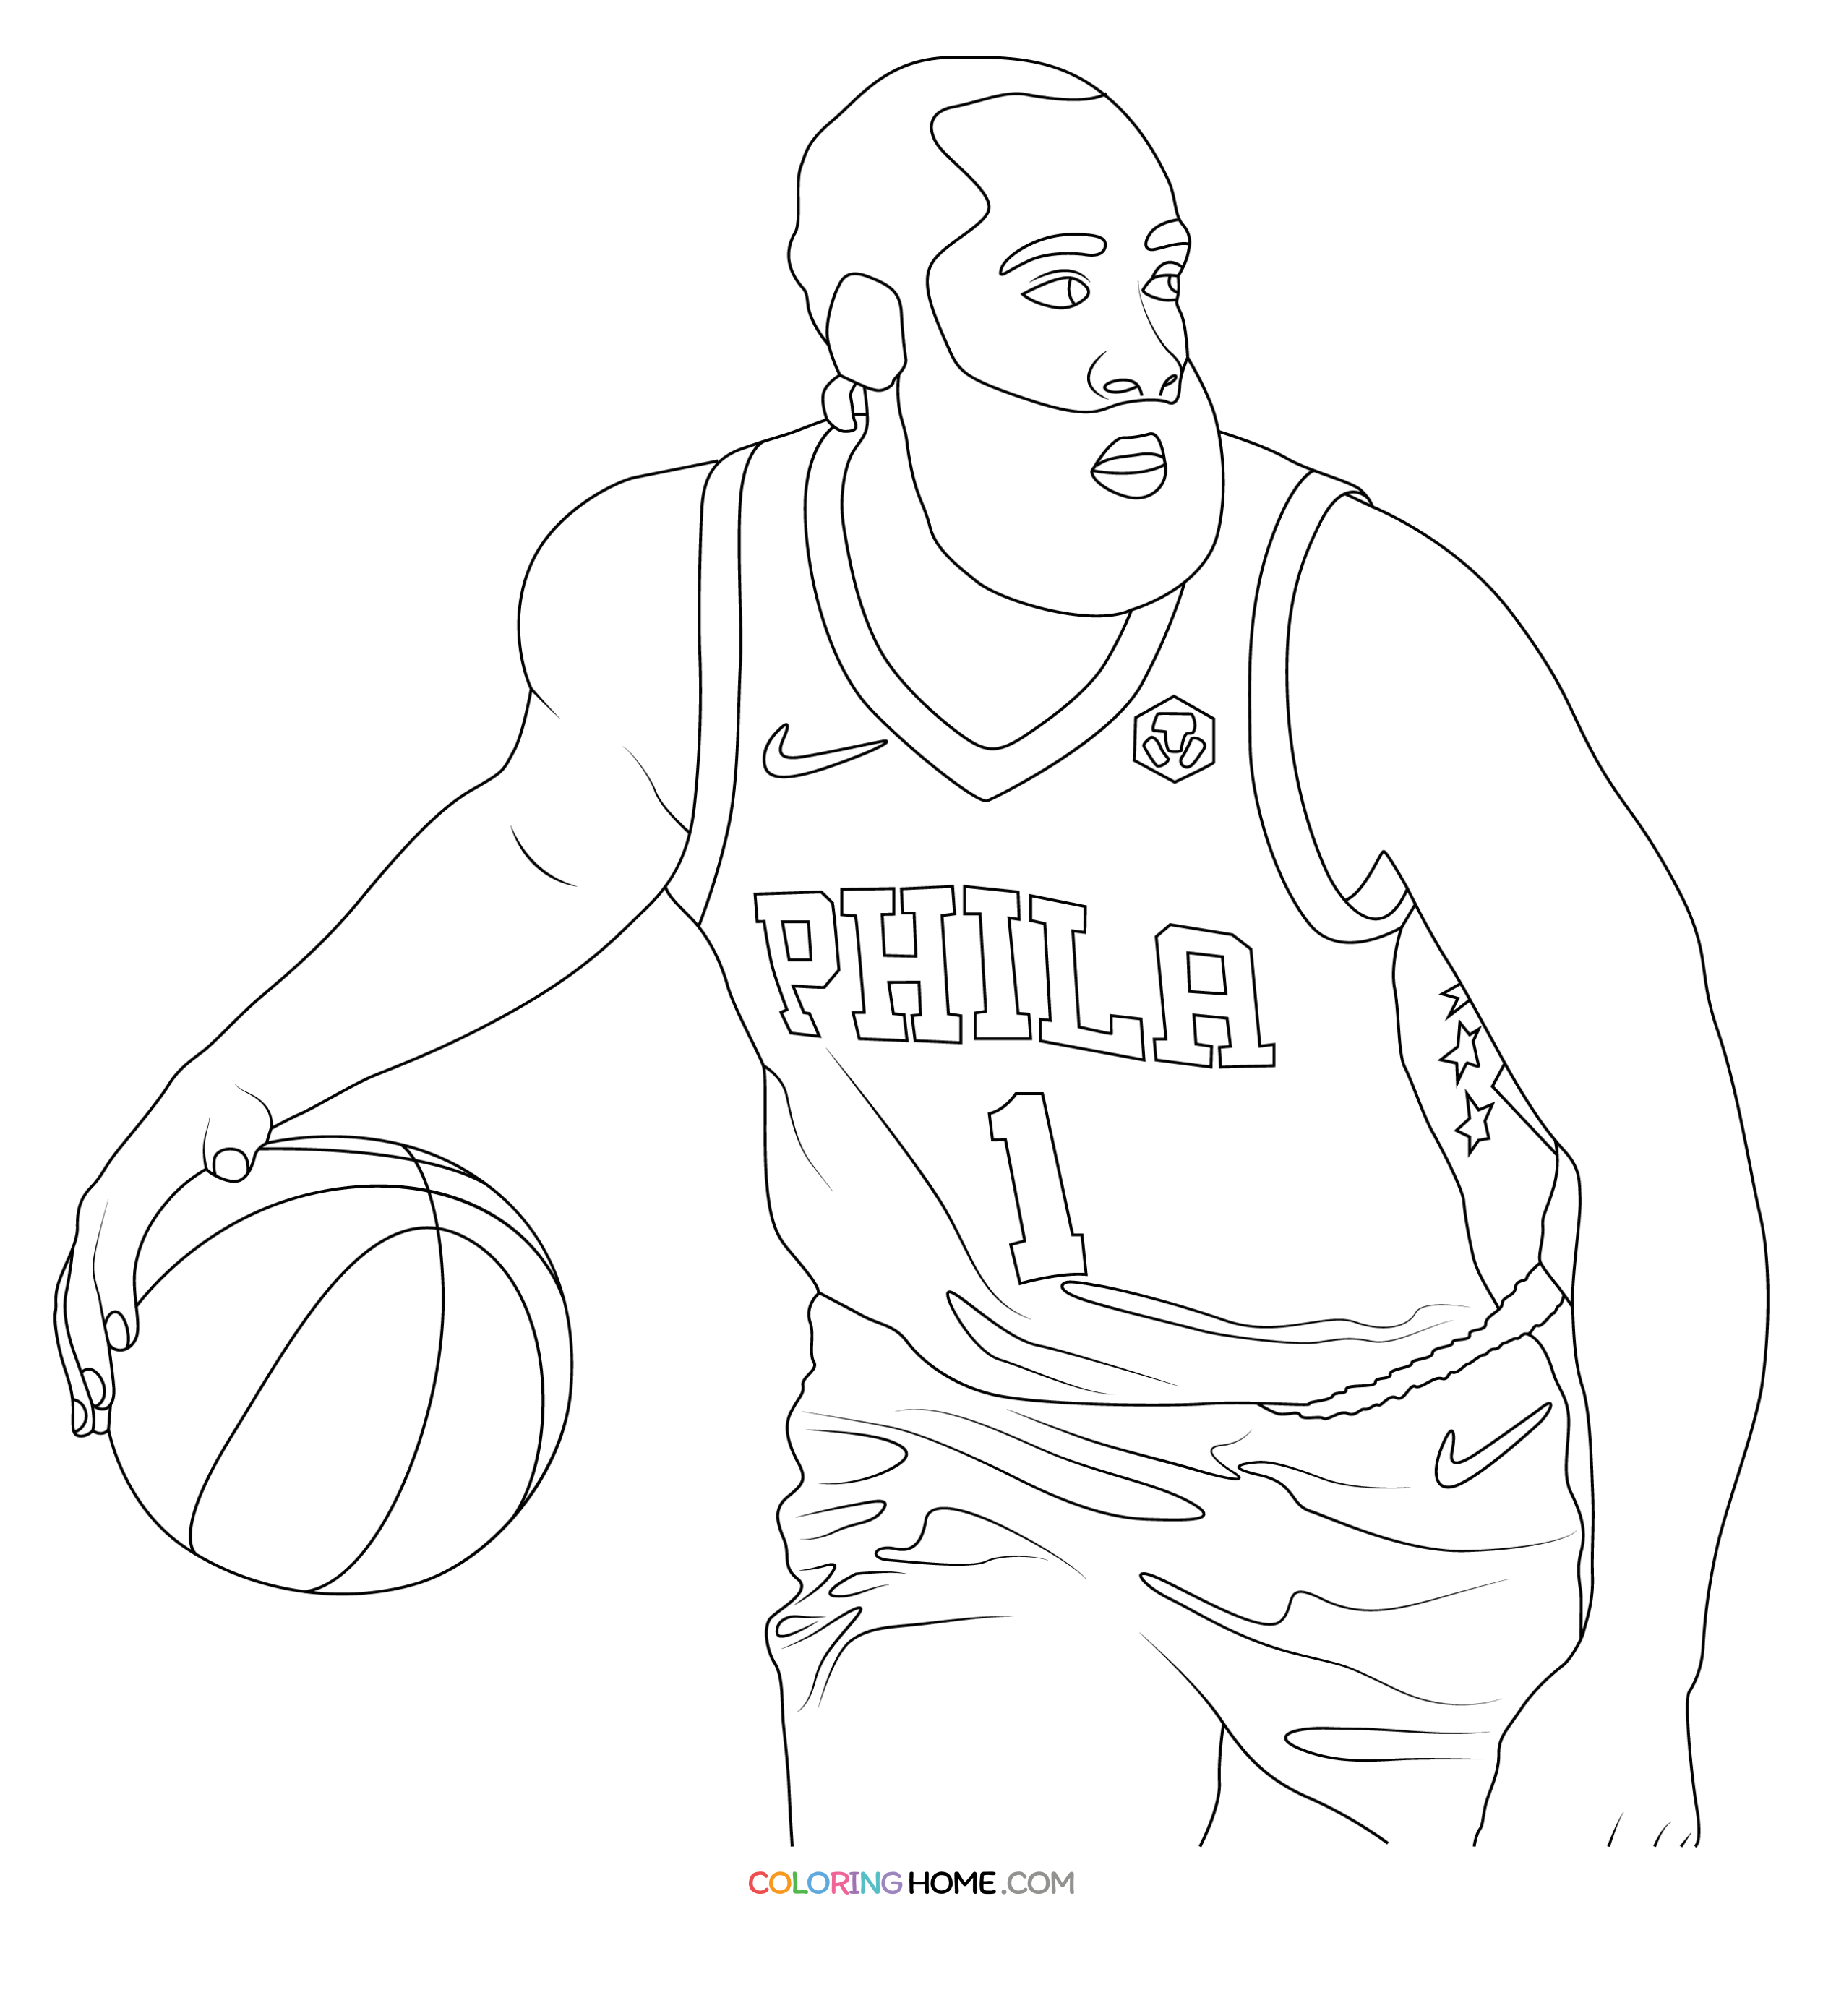 James Harden Coloring Page - Coloring Home